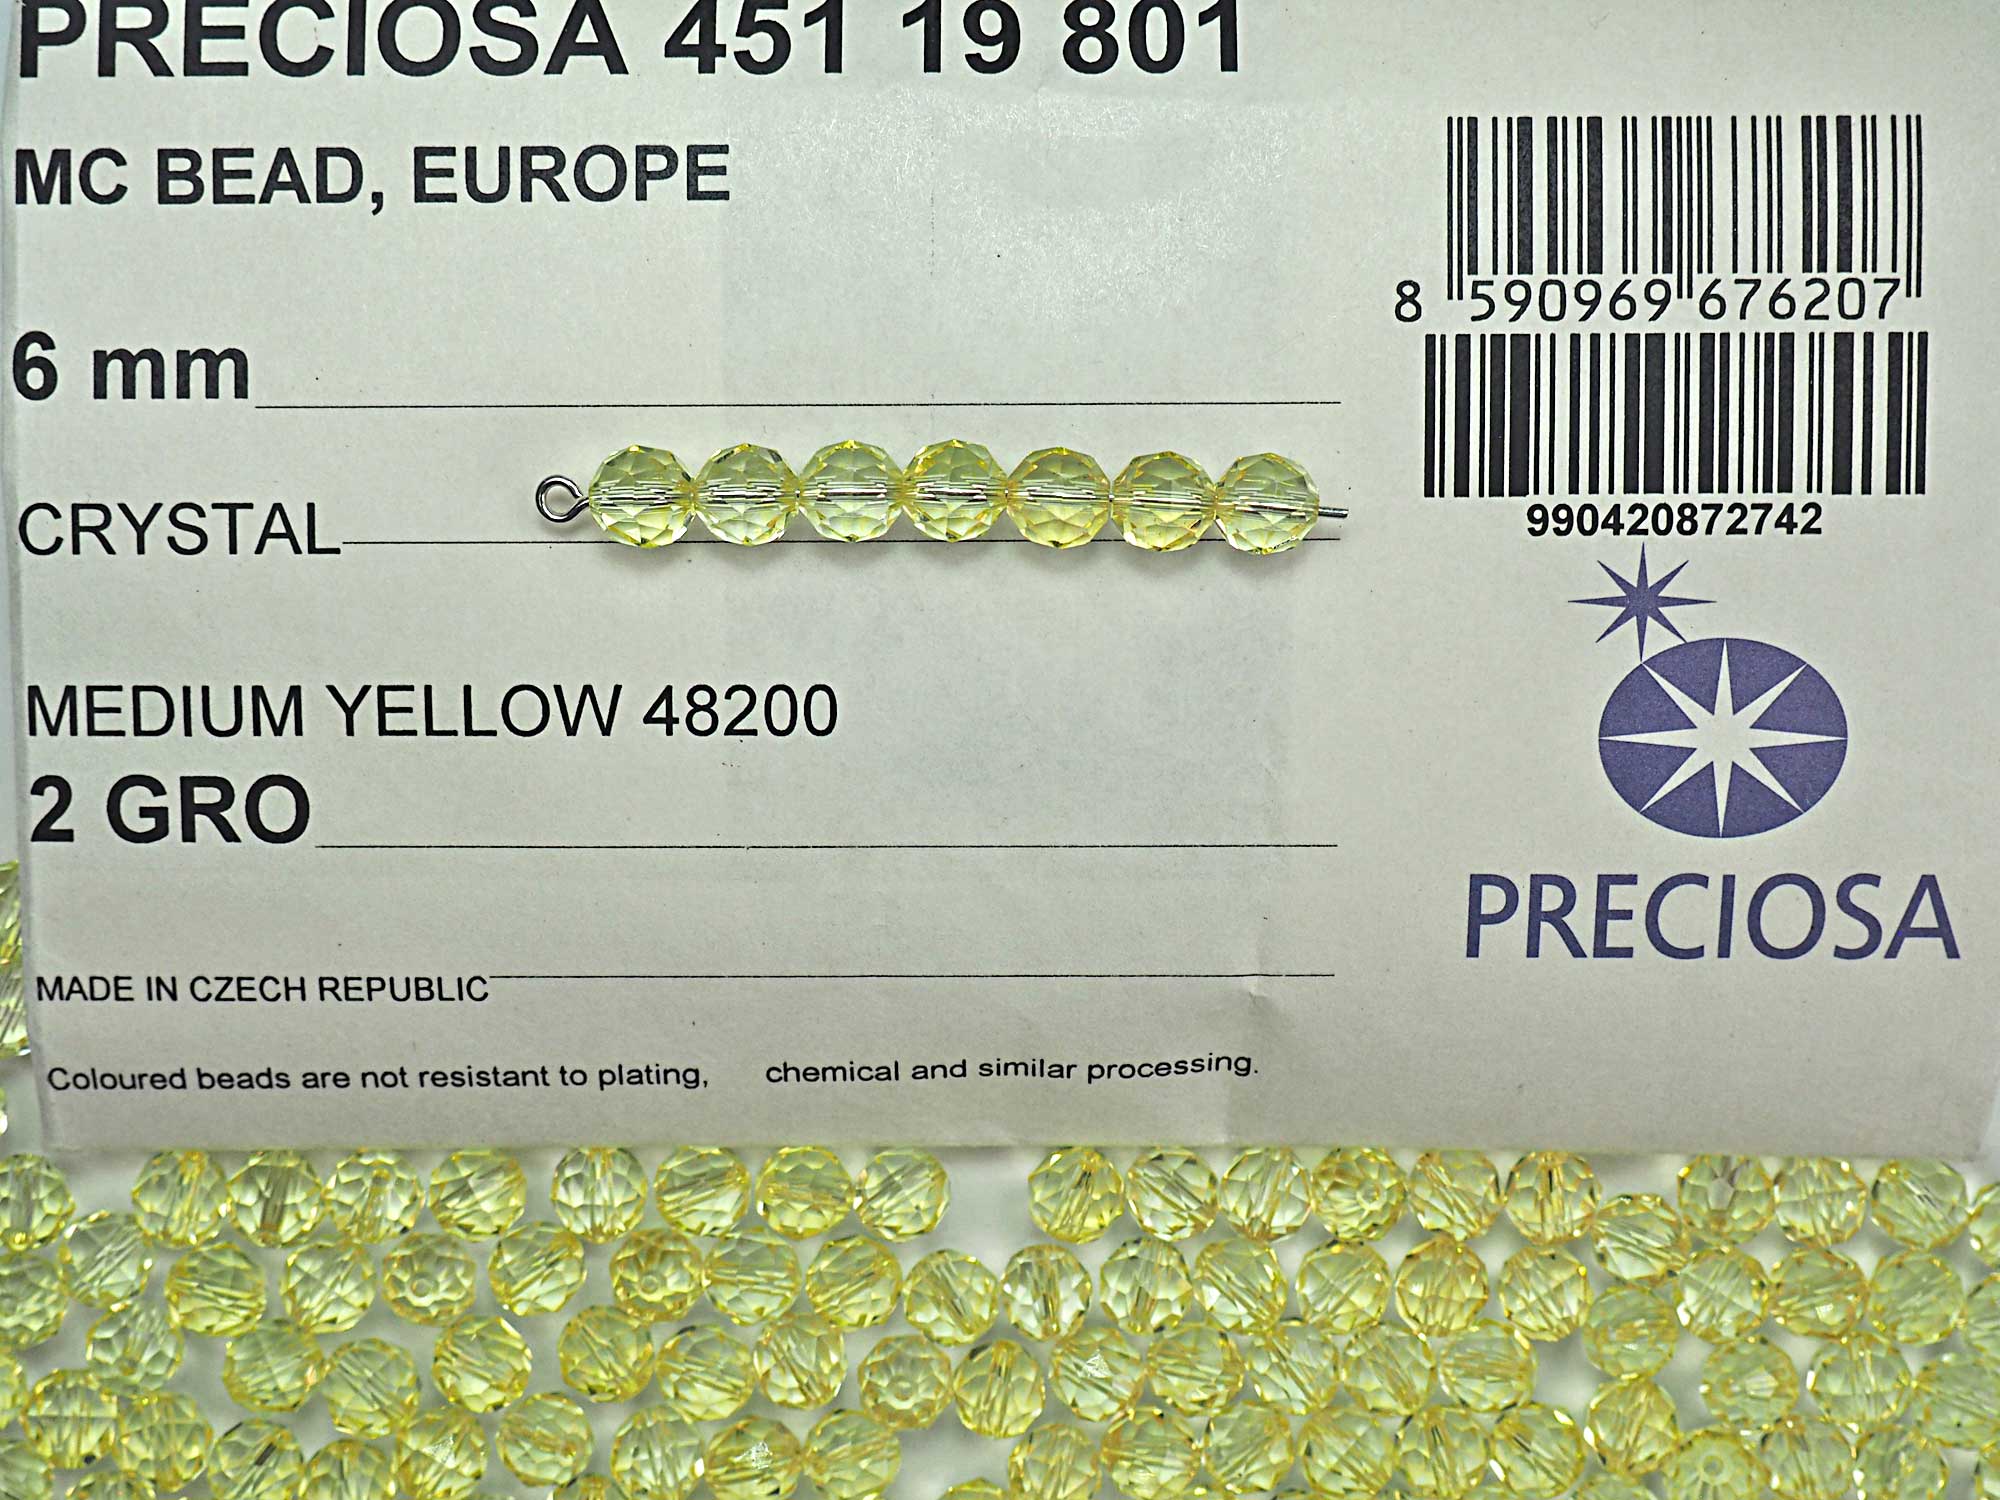 Crystal Medium Yellow coated, Preciosa Czech Machine Cut Europe Crystal Beads in size 6mm, 288 pieces